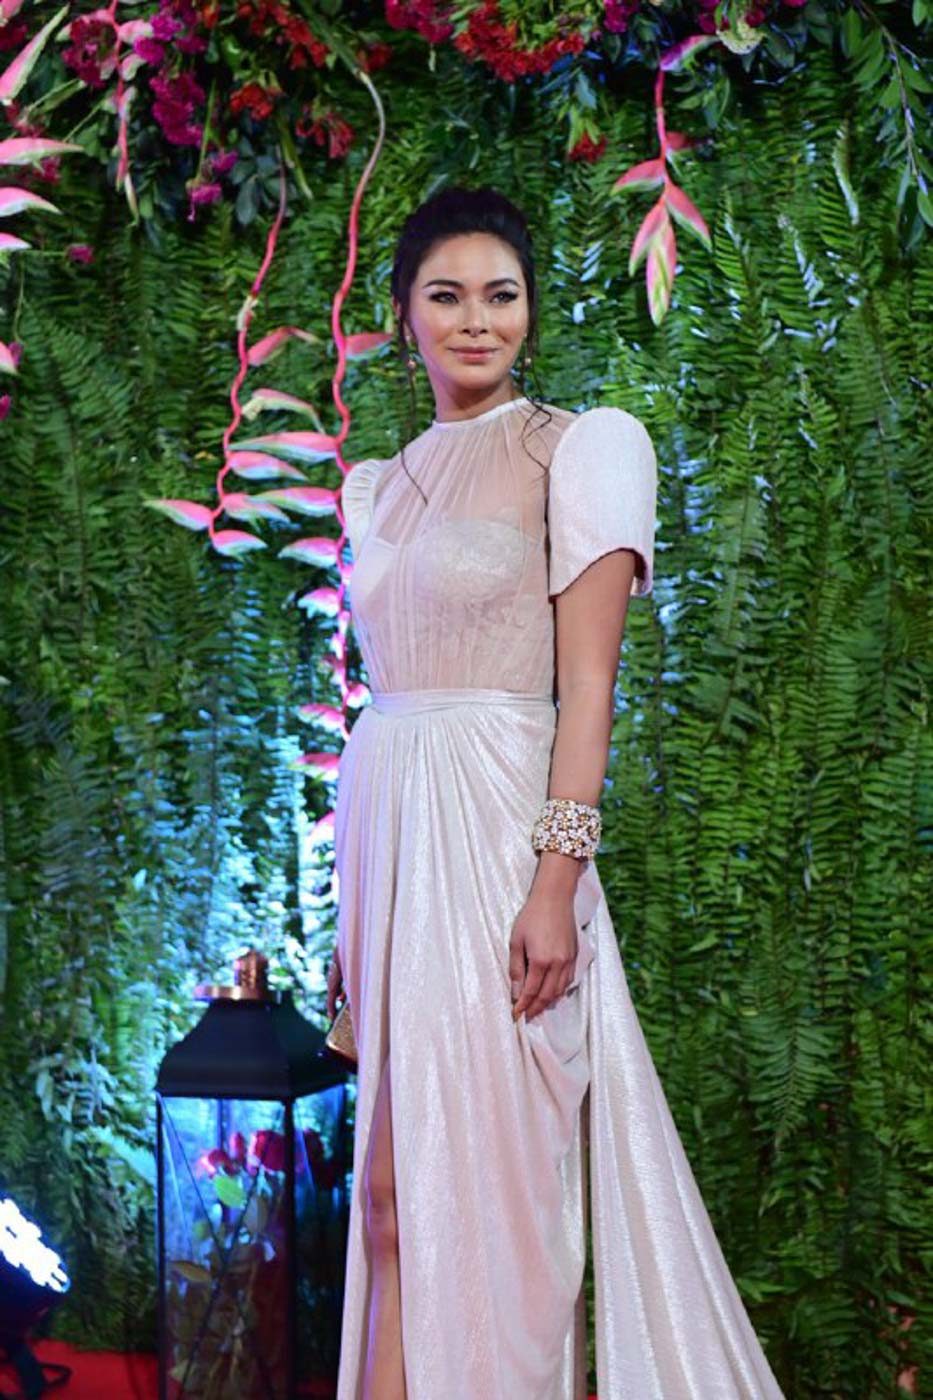 IN PHOTOS: Beauty queens at the ABS-CBN Ball 2019